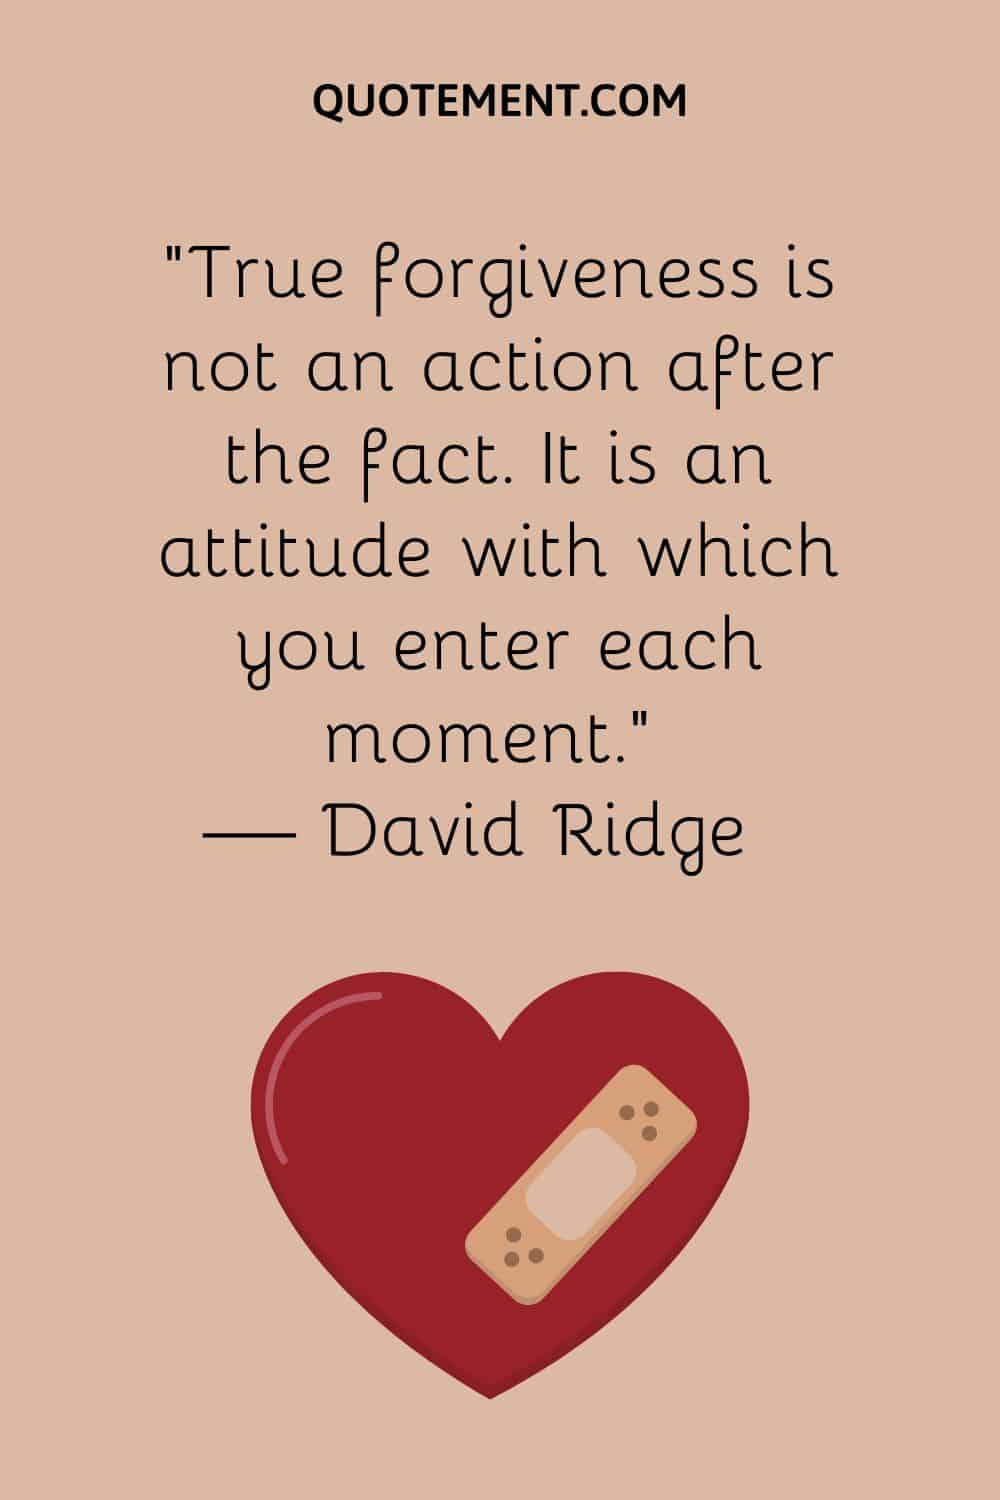 True forgiveness is not an action after the fact.